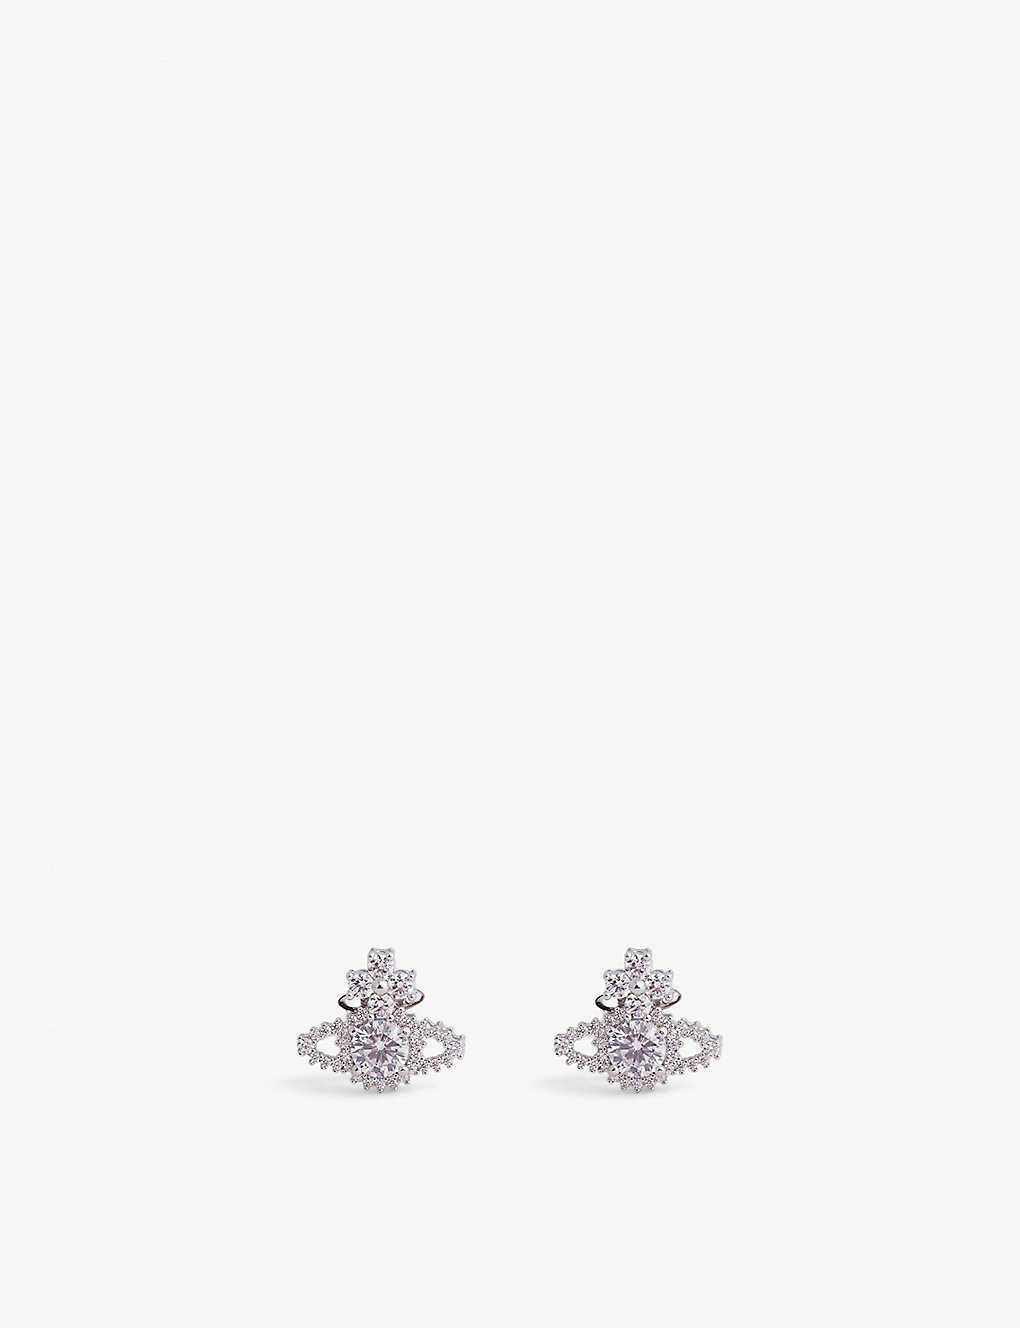 Vivienne Westwood Jewellery Valentina Brass And Crystal Stud Earrings In Platinum/ White Cz